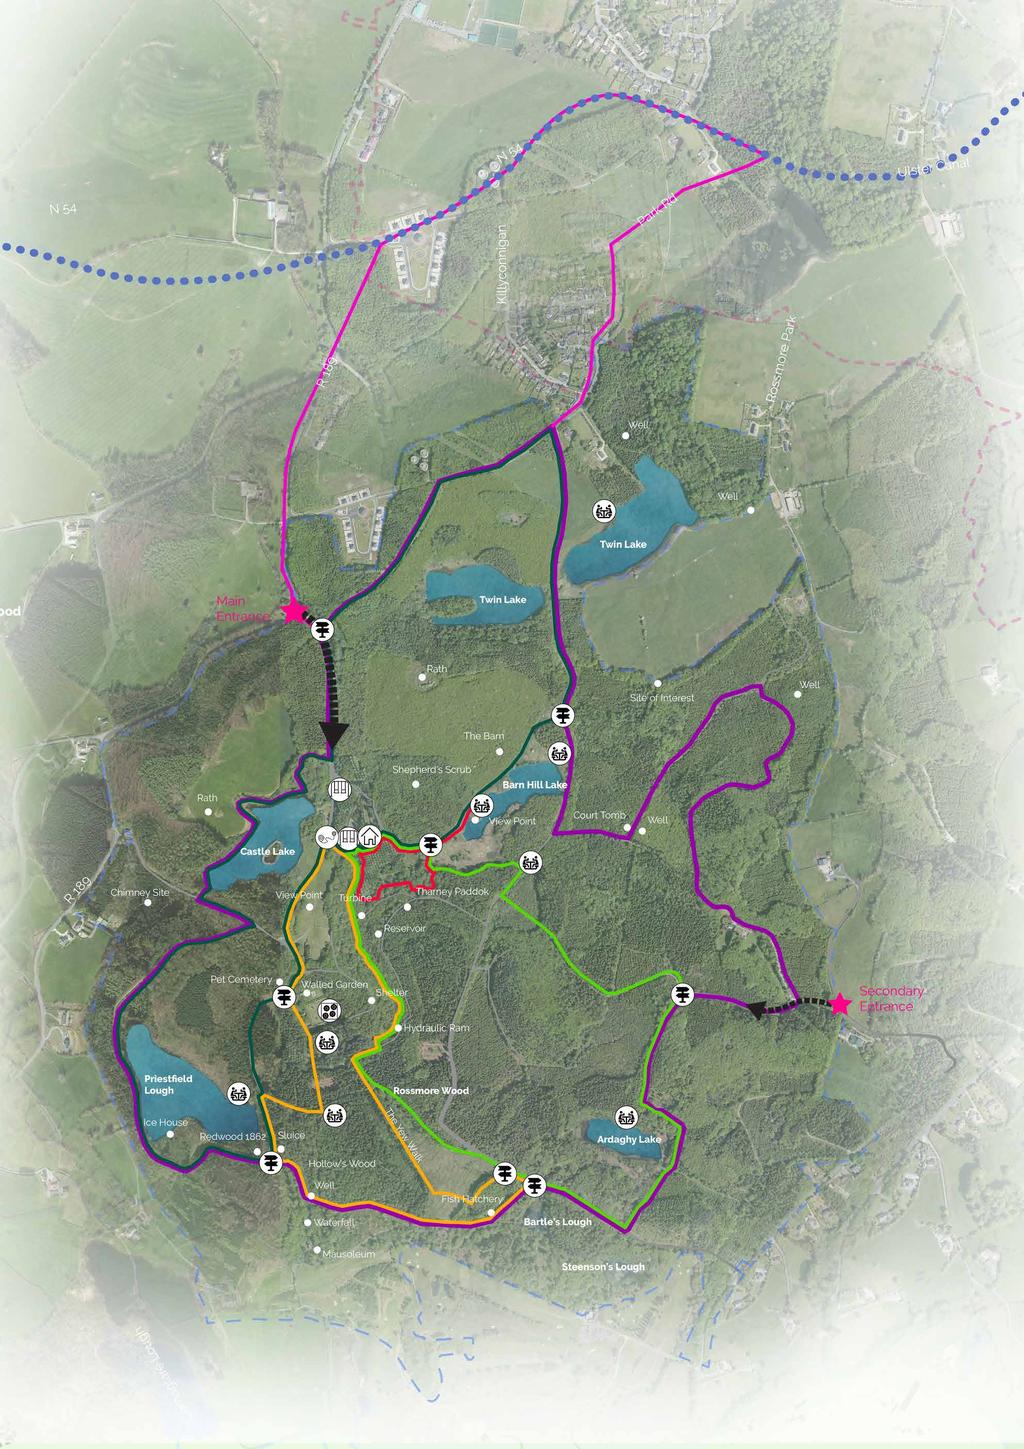 04 THE PLAN projects: The Draft Masterplan for Rossmore Forest Park contains a total of 17 projects. These are divided into three categories.